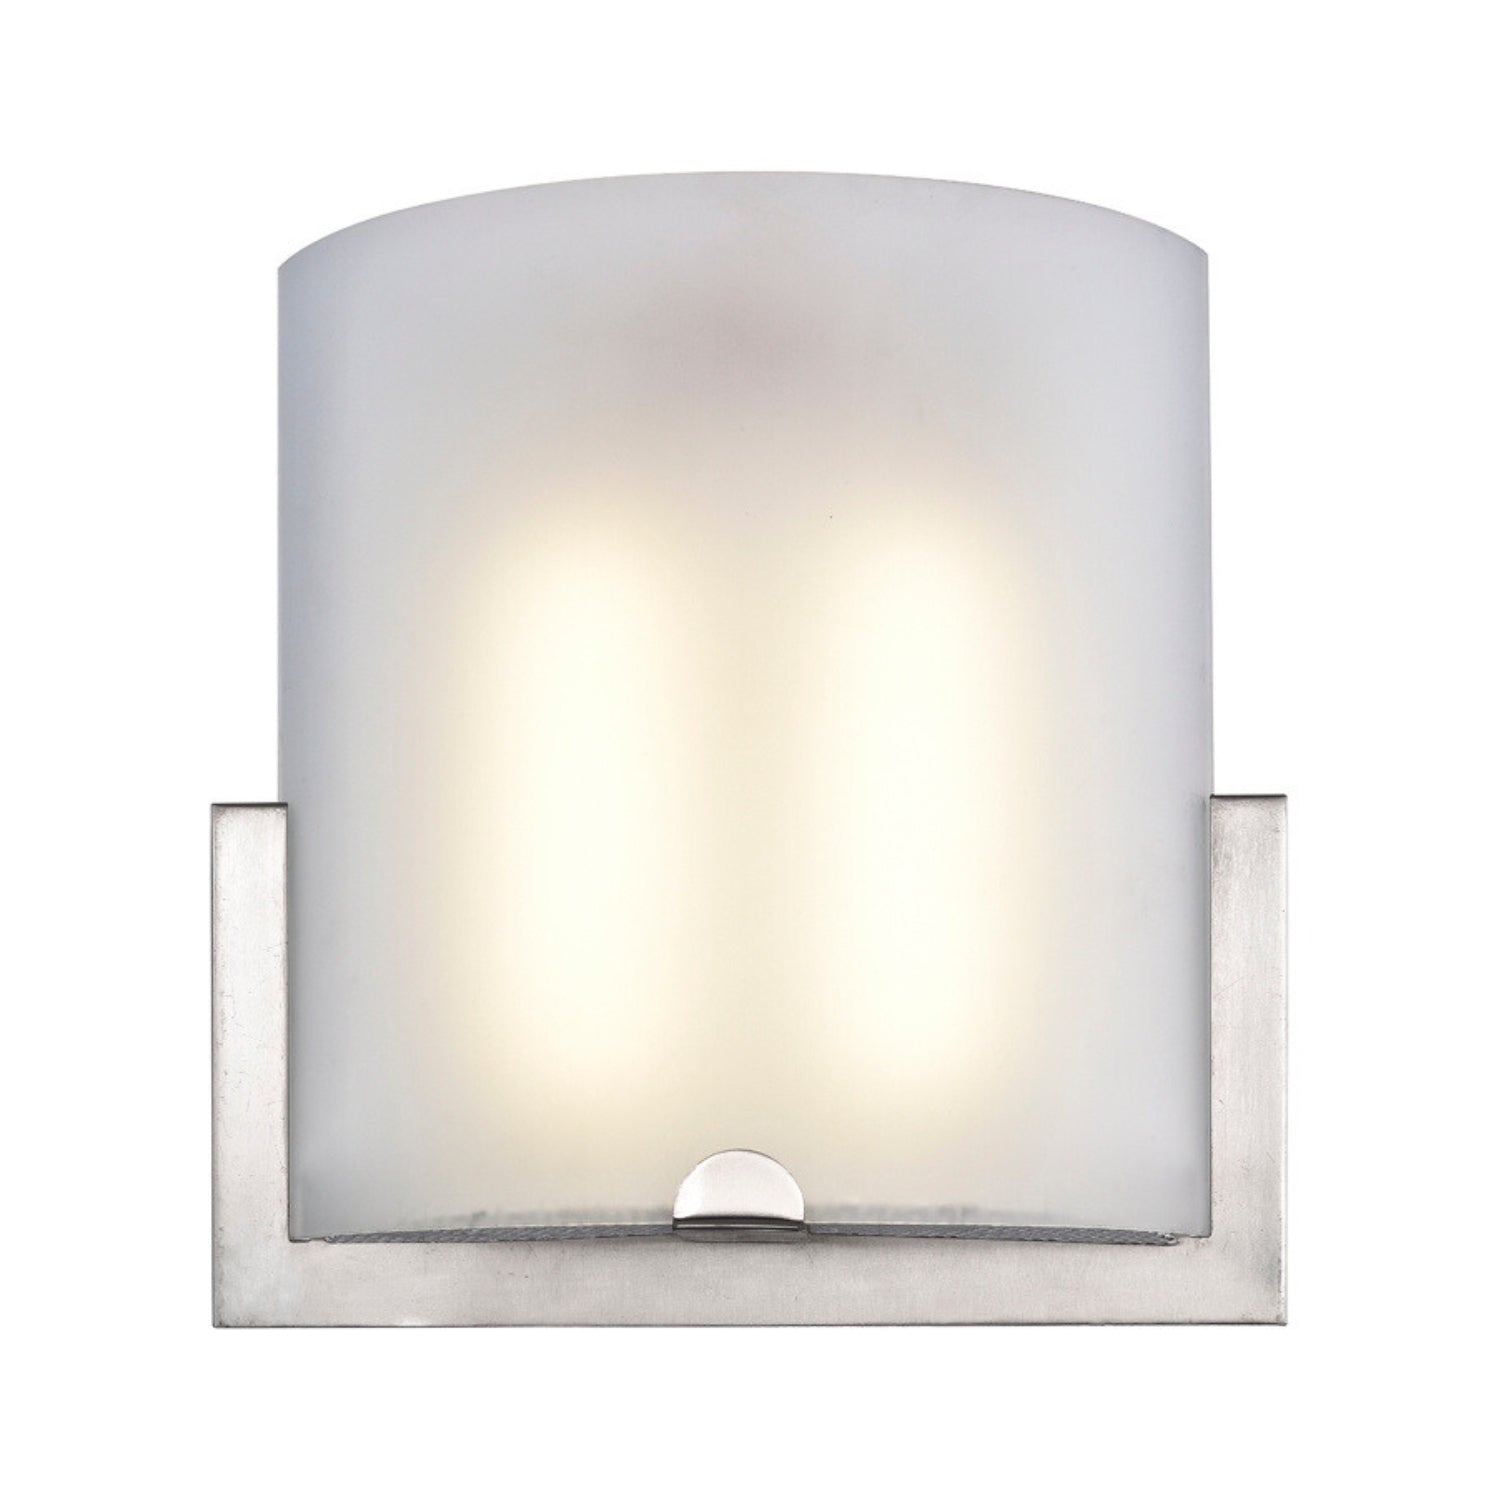 Image of wall light fixture, light sconce or home light fixture